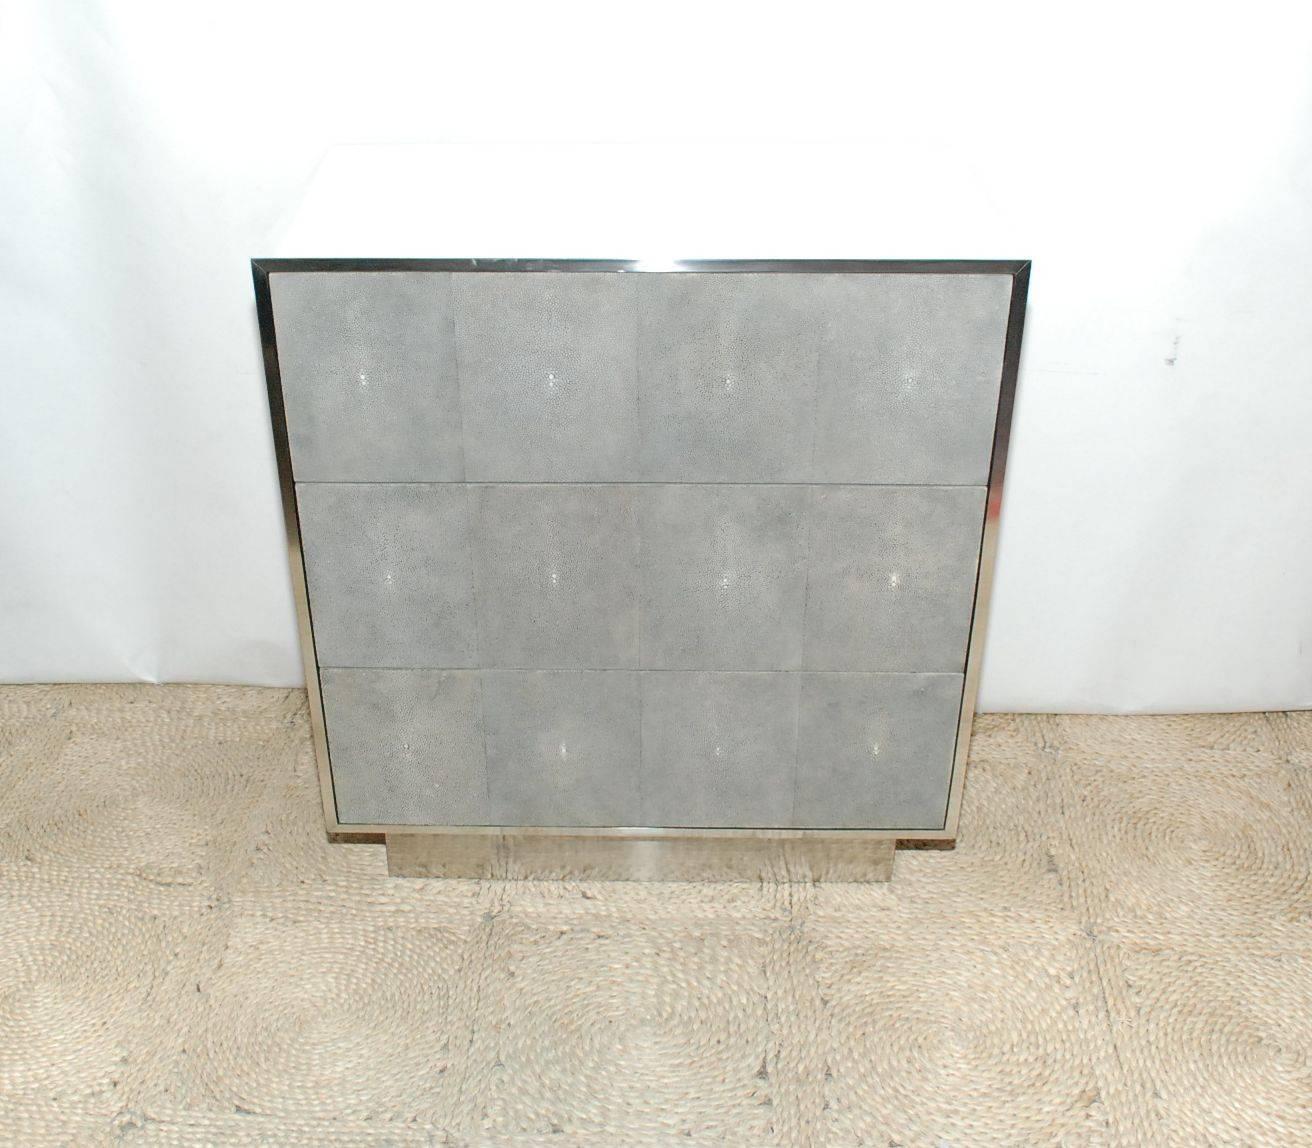 Pair of steel chest of drawers cover with light grey shagreen. (Three drawers).